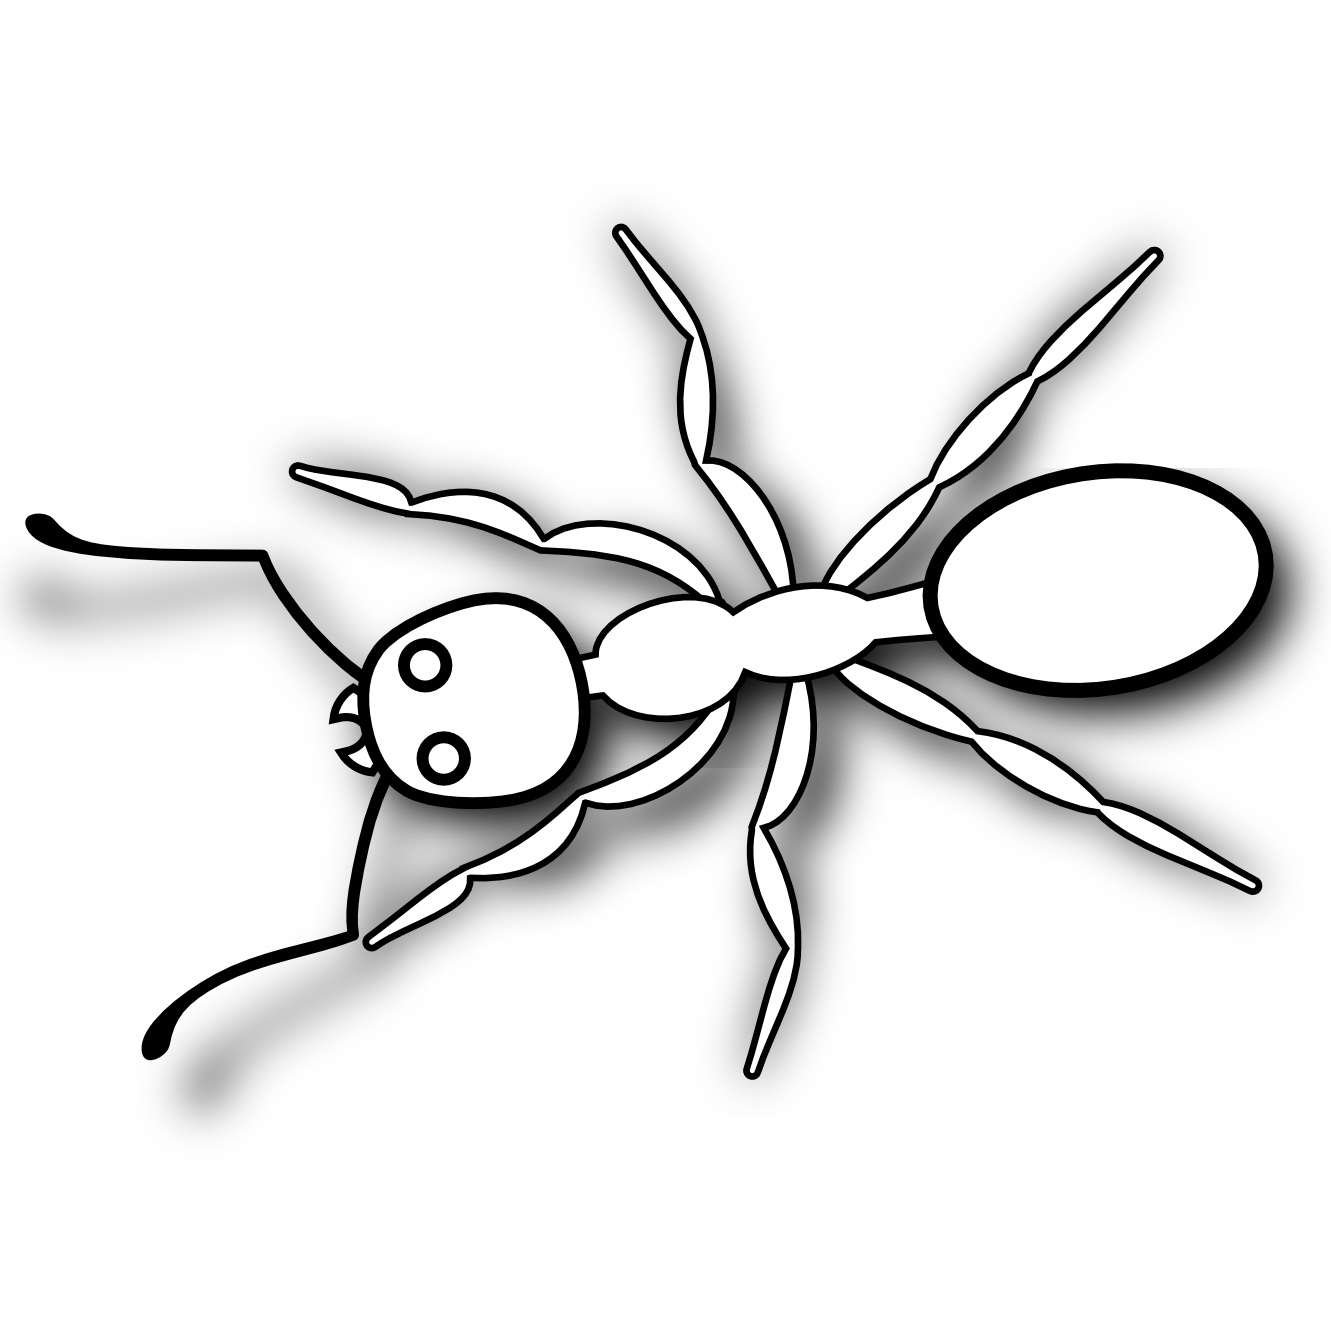 Free Pictures Of Ants For Kids, Download Free Clip Art, Free.